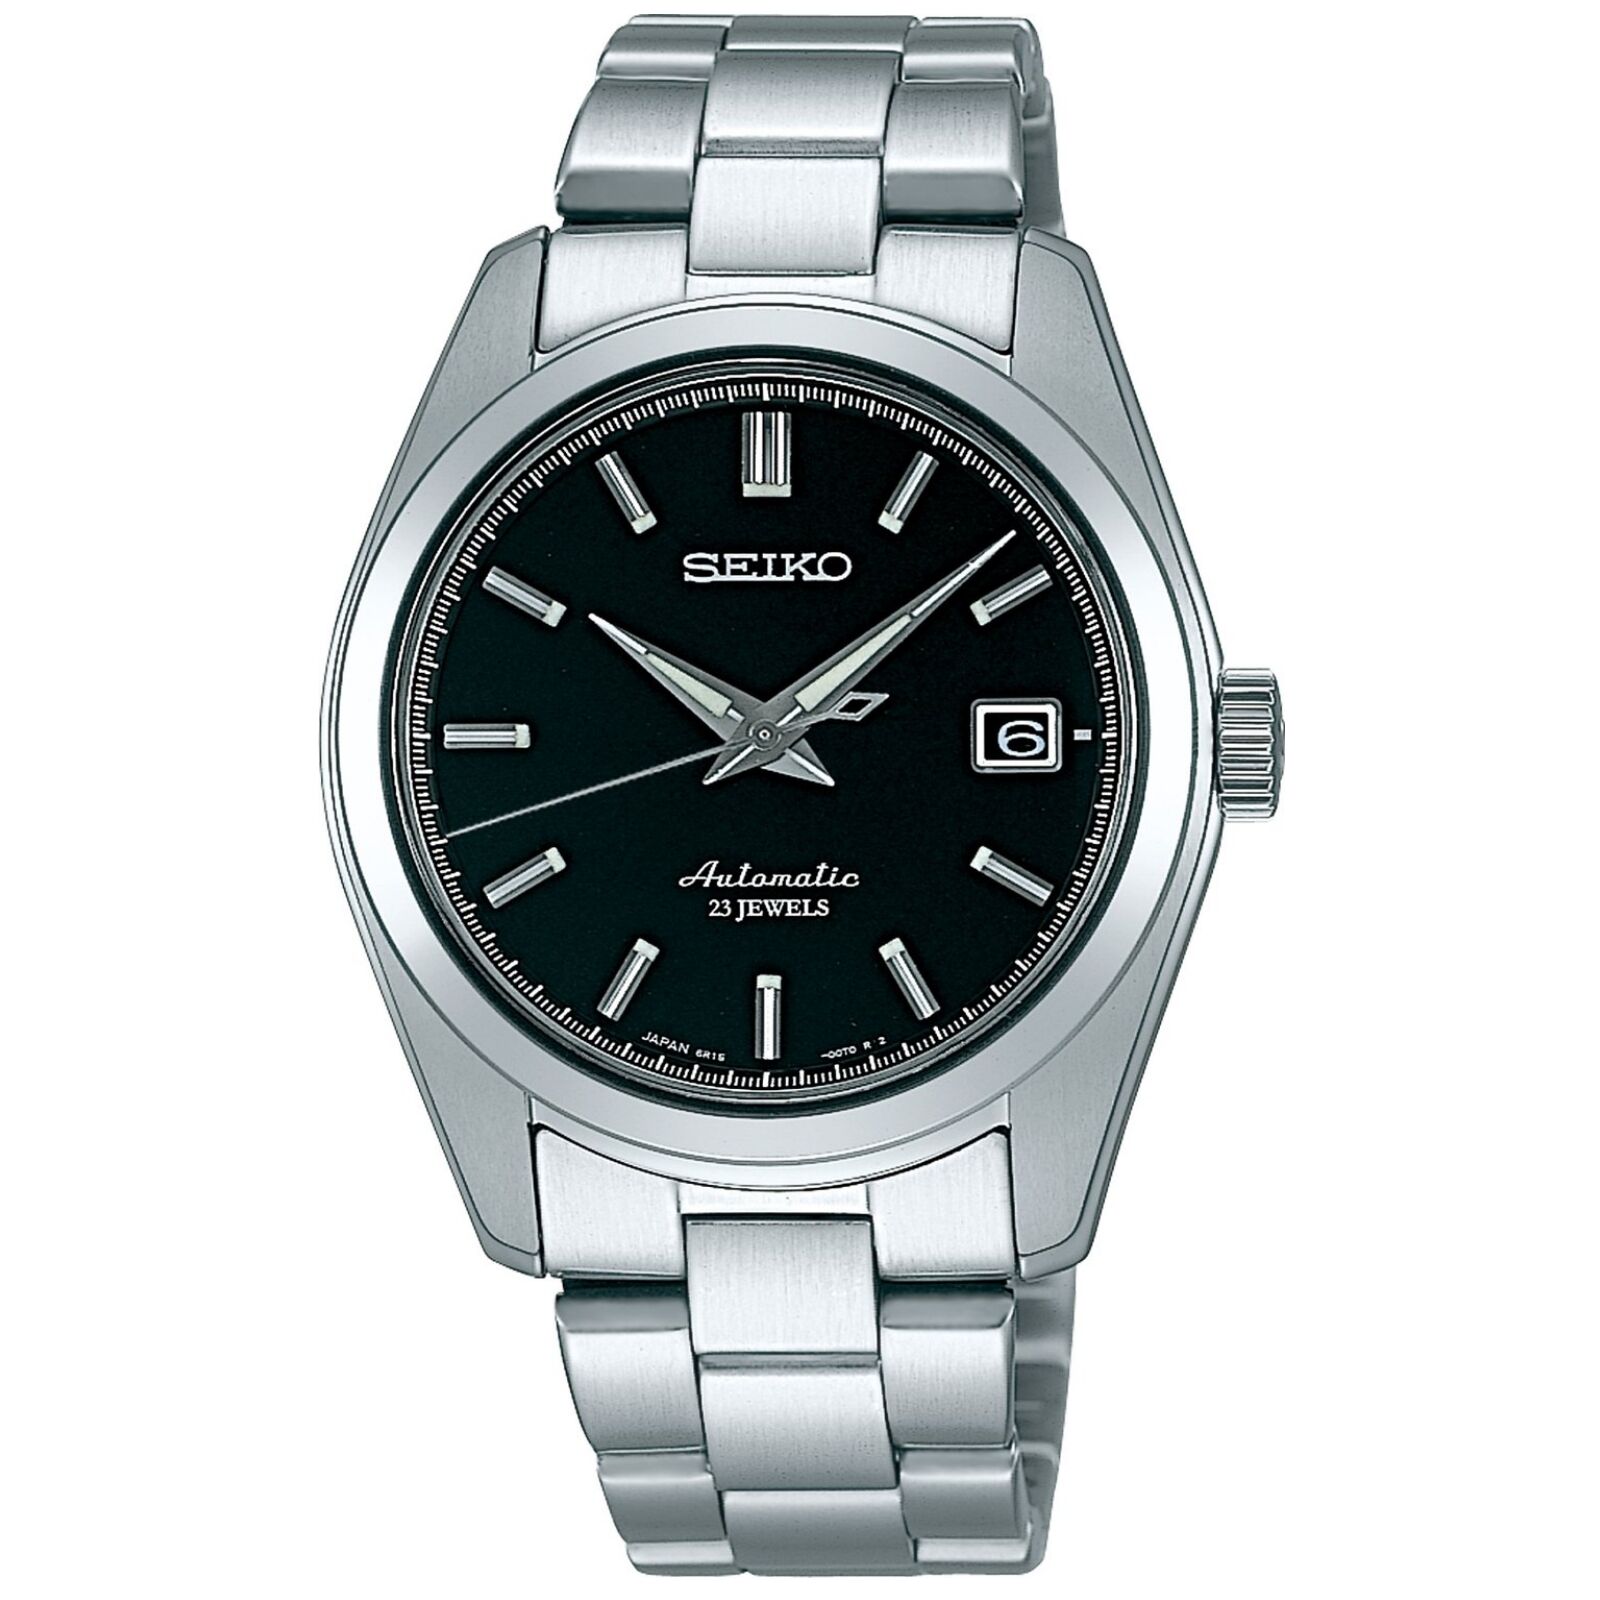 SEIKO SARB033 Mechanical Automatic Stainless Steel Men's Watch - Made In Japan